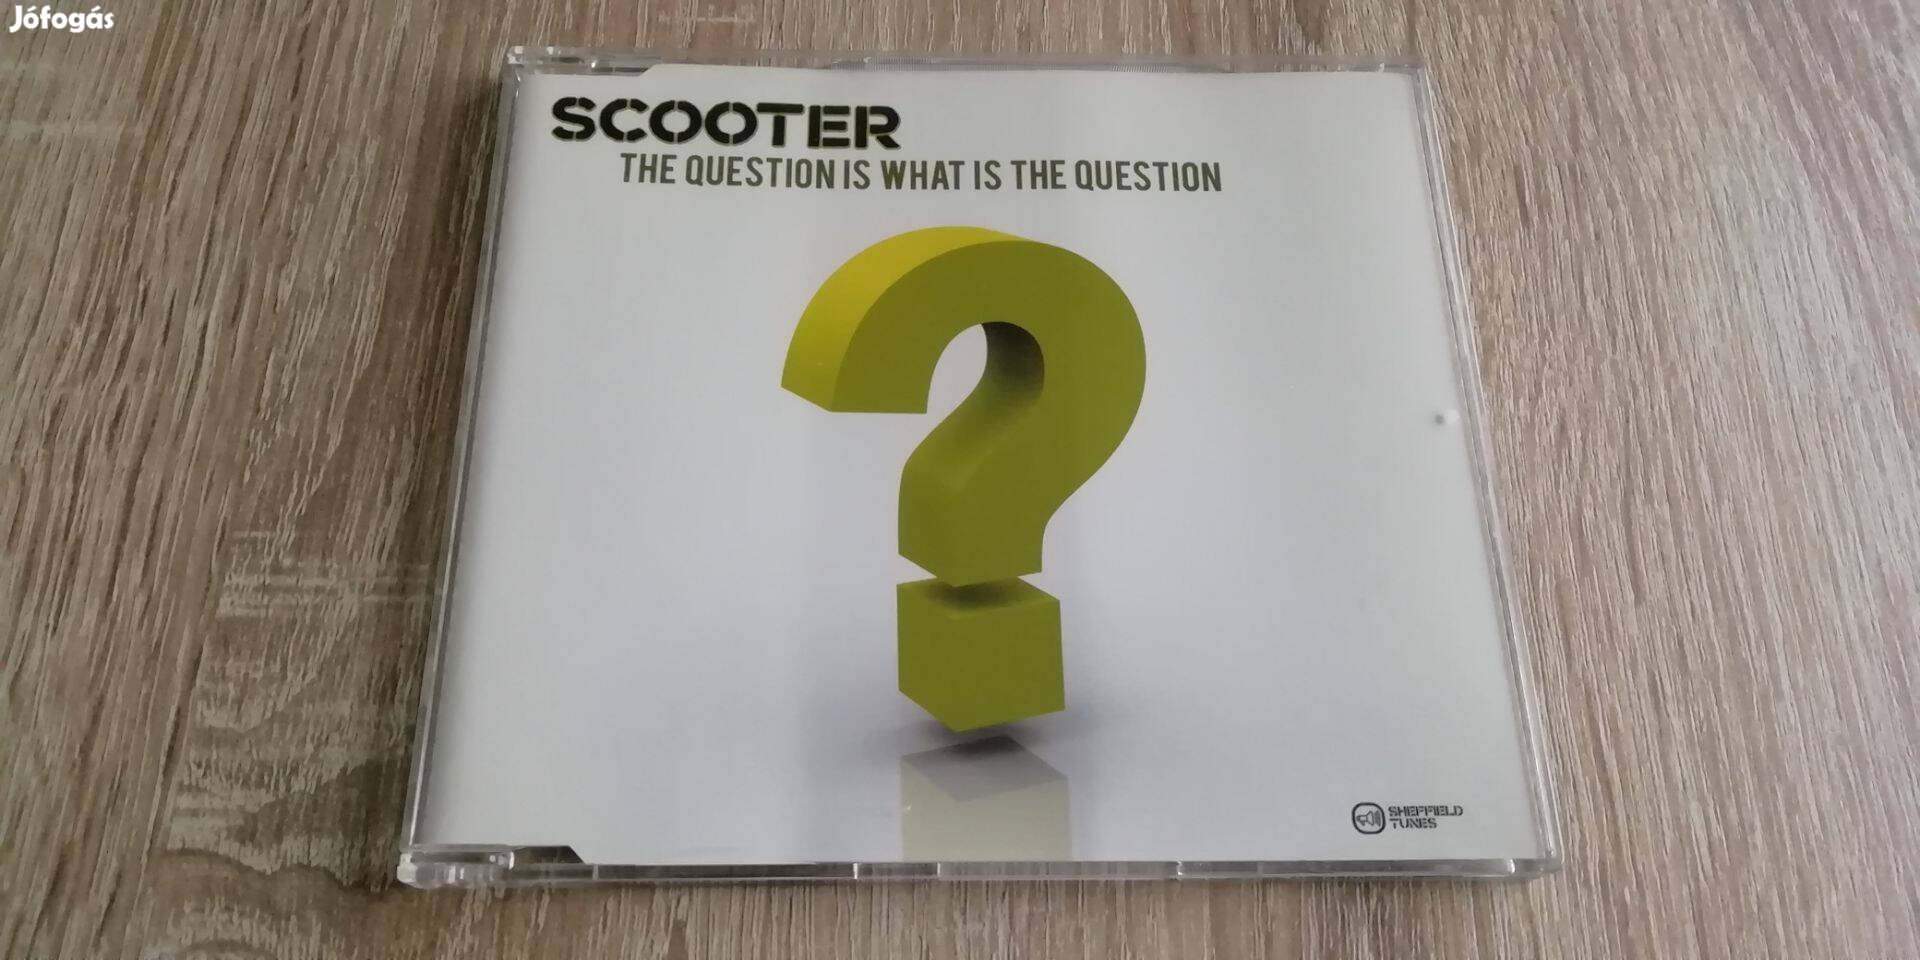 Scooter: The Question Is What Is the Question? - eredeti, karcmentes